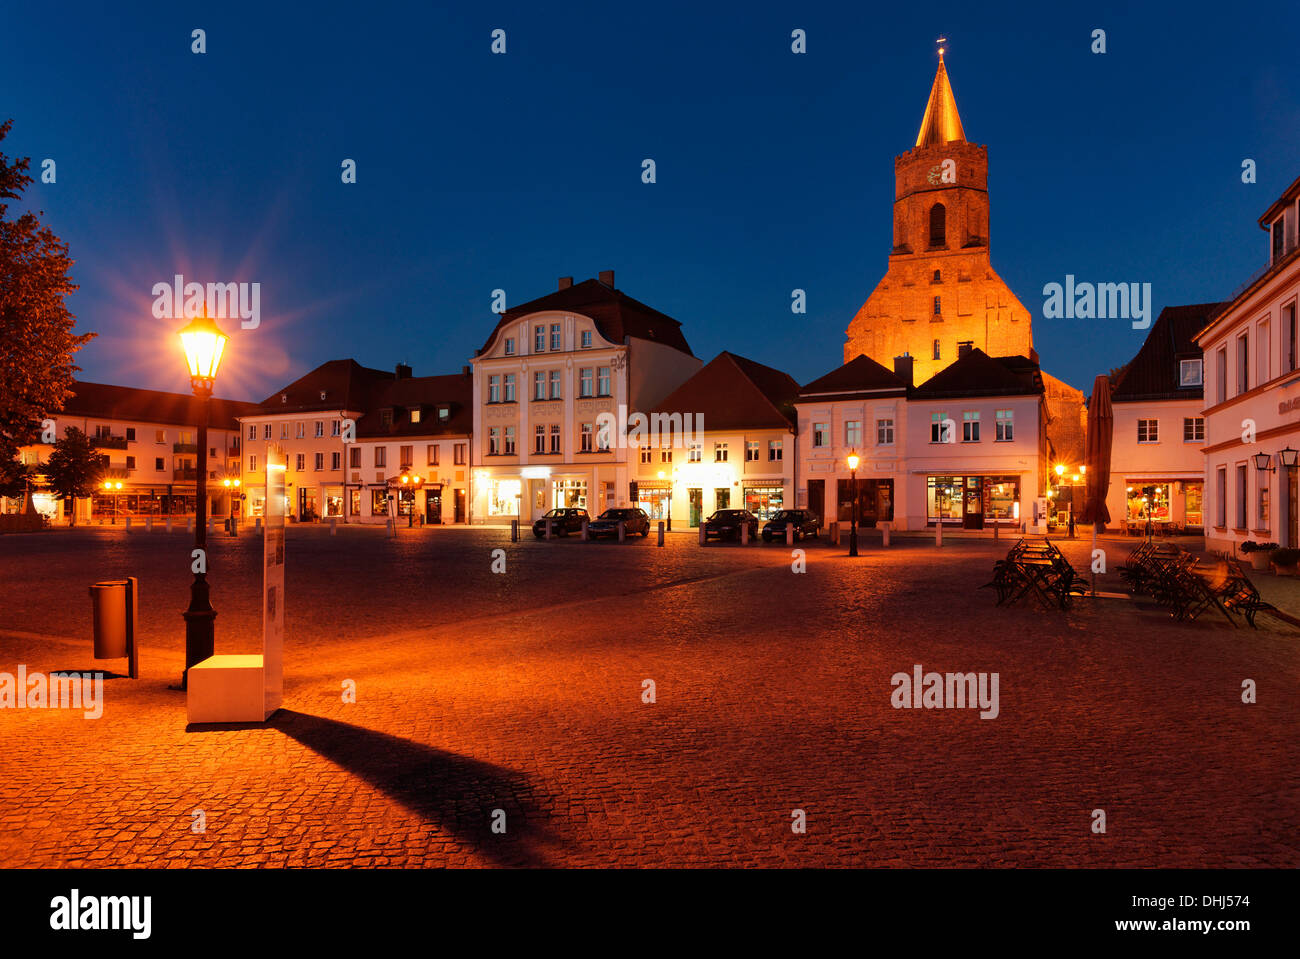 Market place and St. Mary's church at night, Beeskow, Land Brandenburg, Germany, Europe Stock Photo